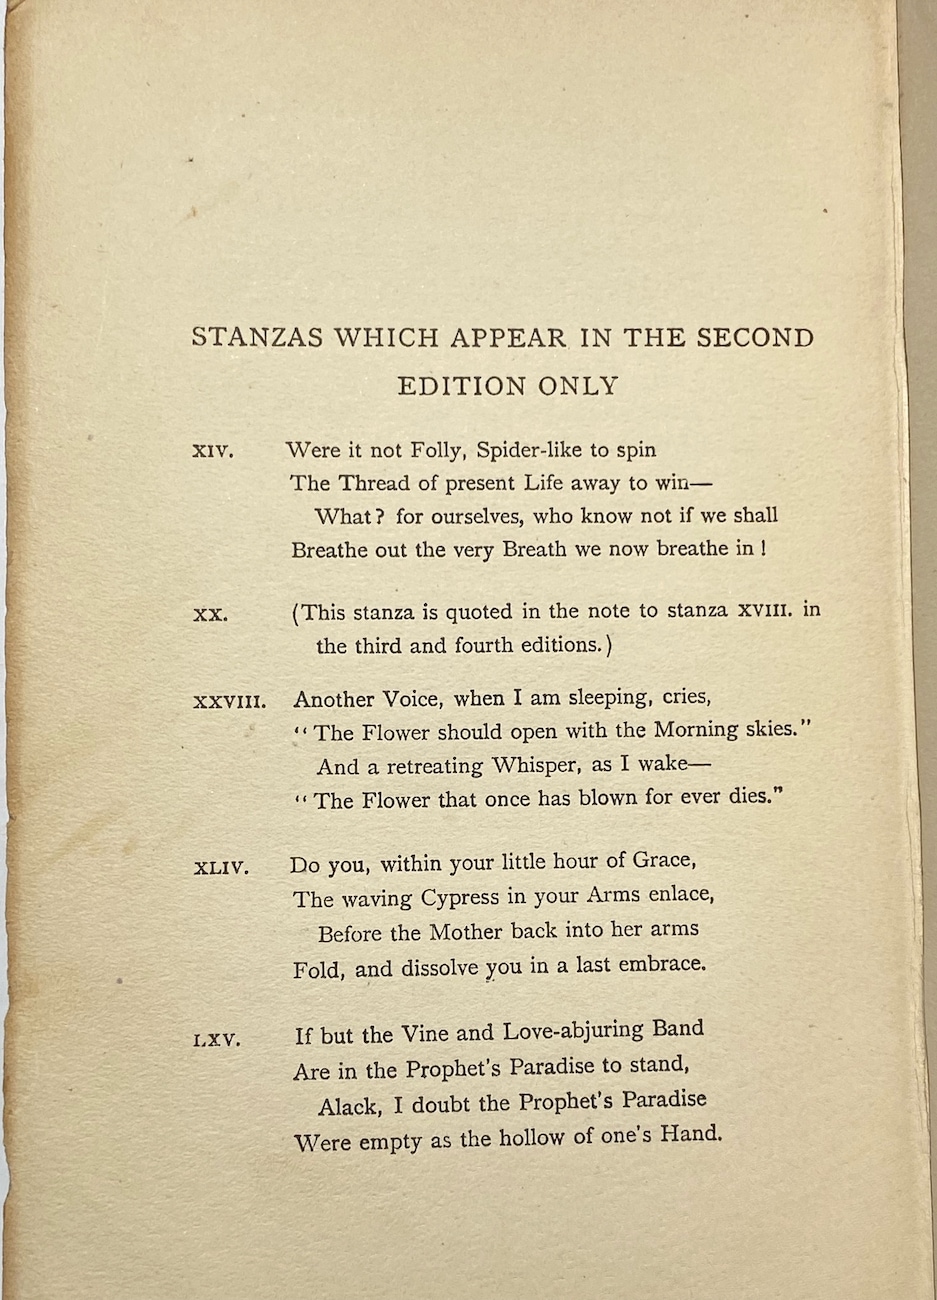 Stanzas in the second edition only